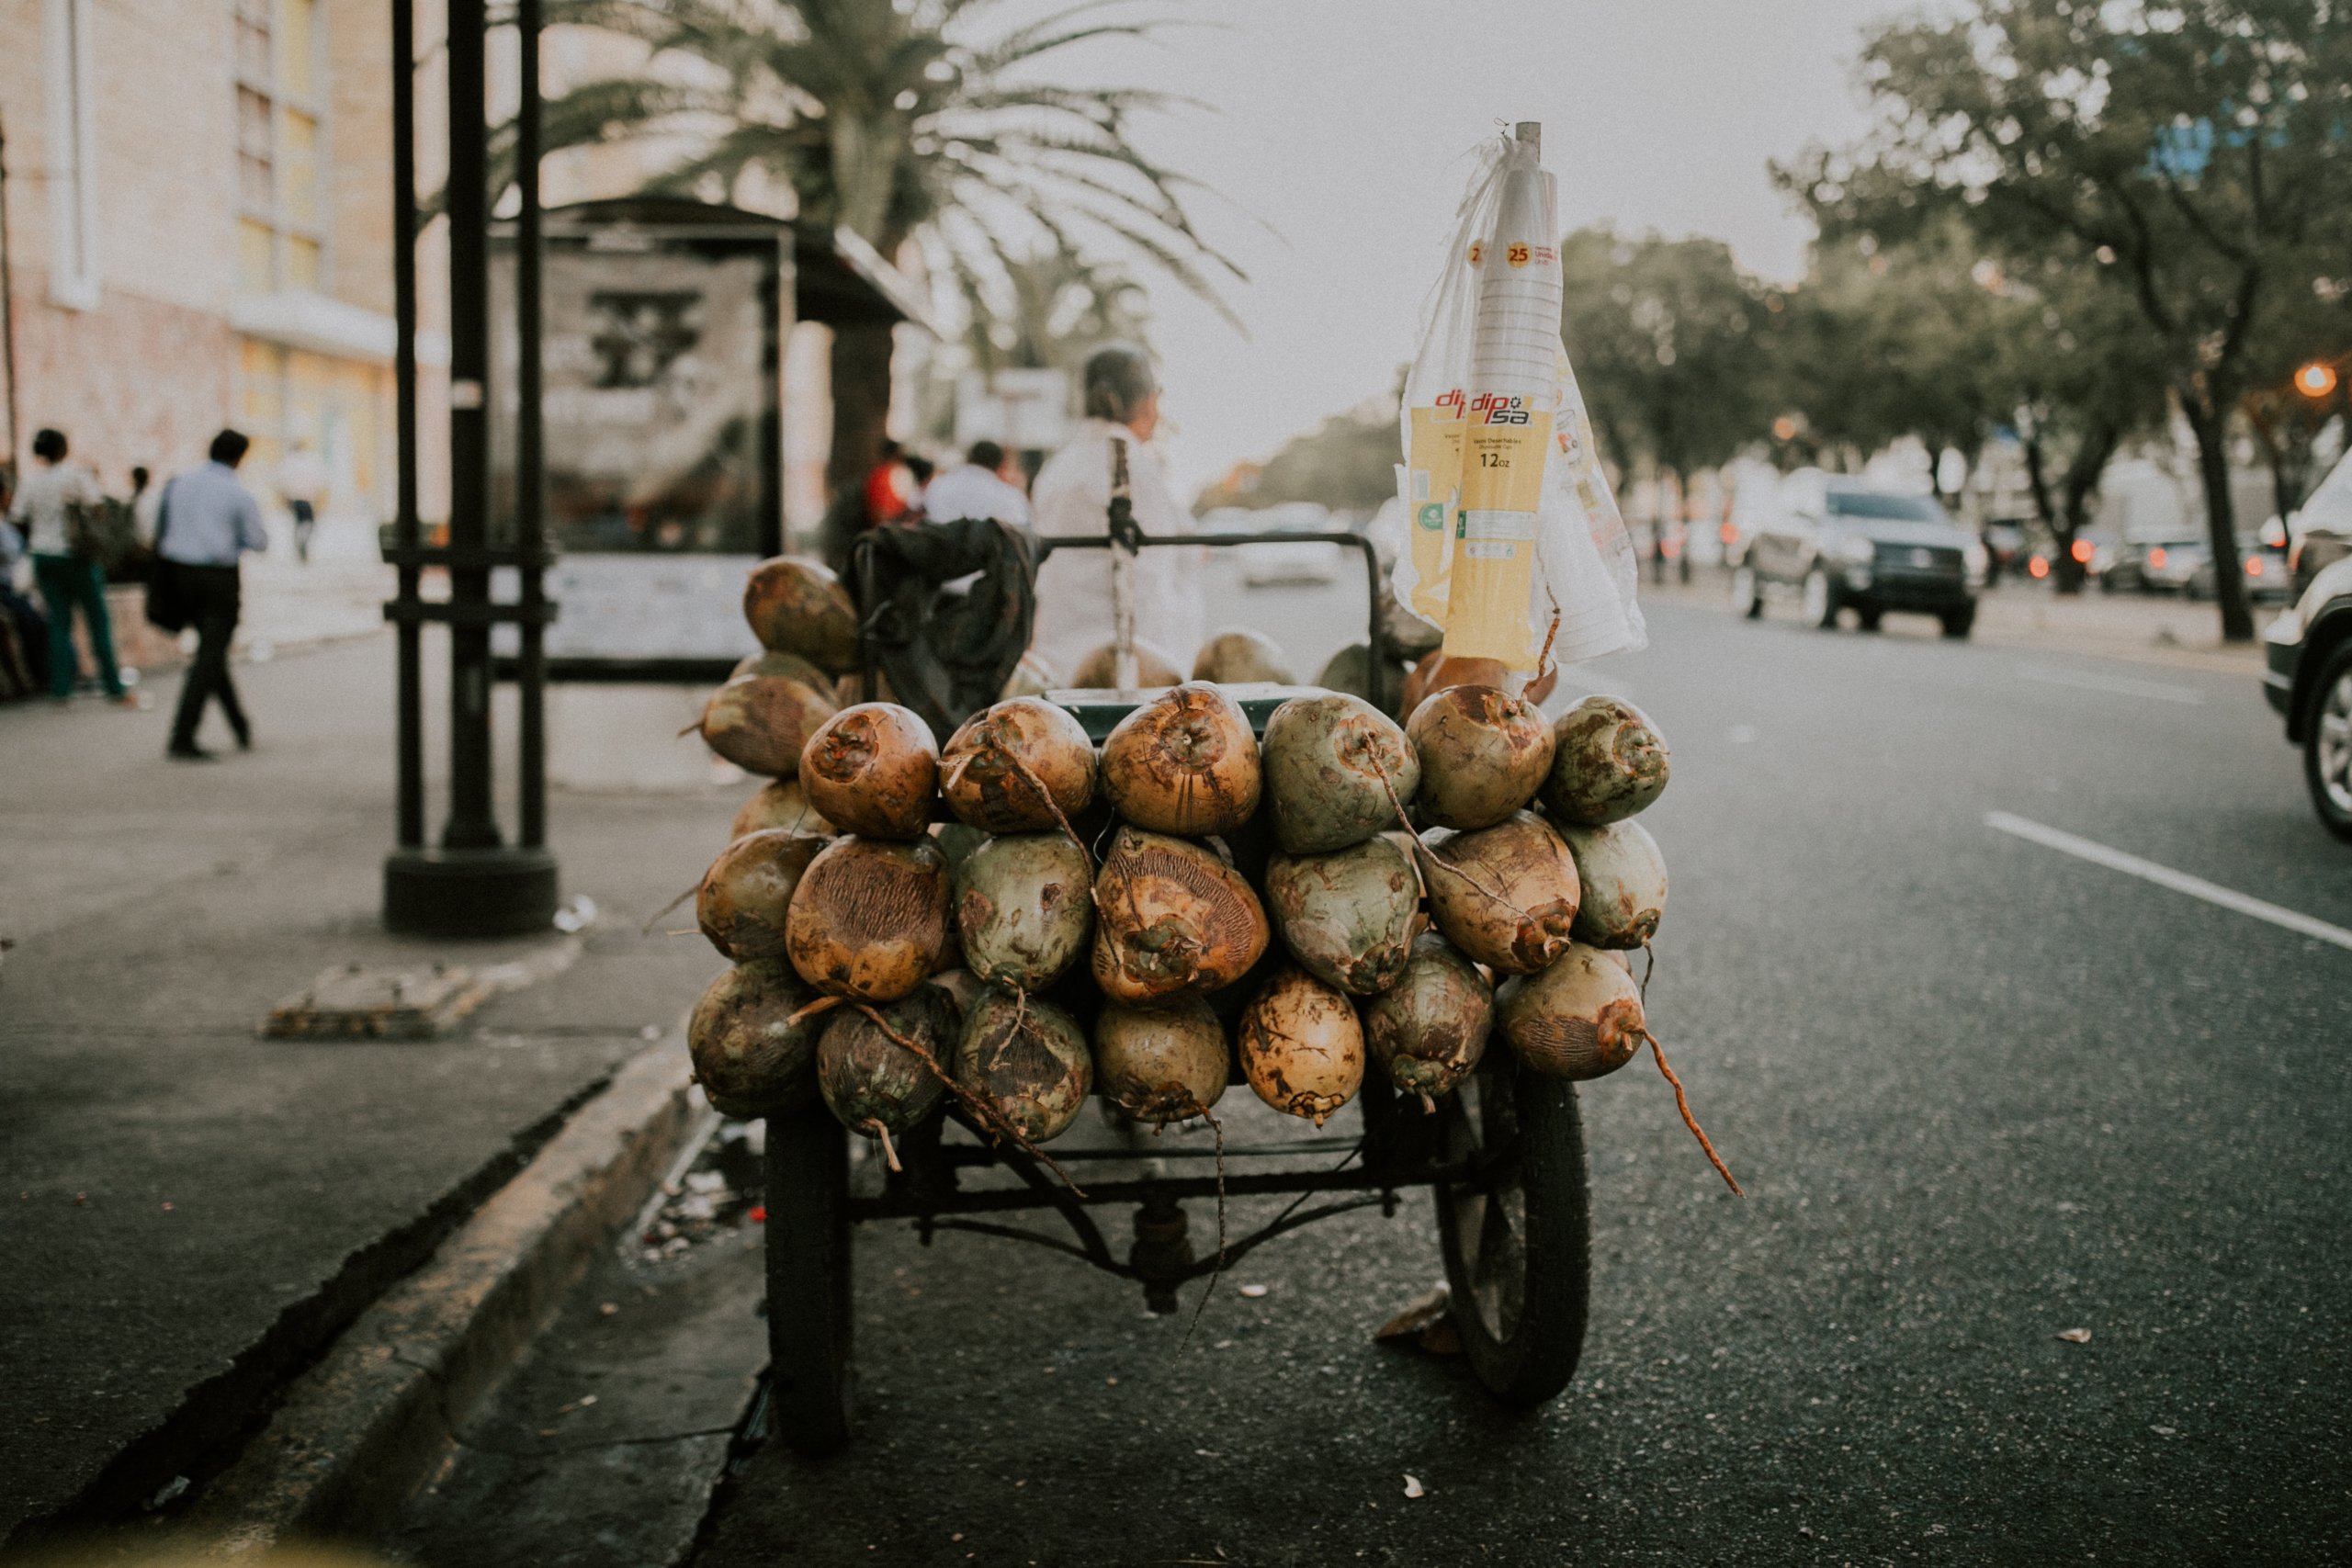 Coconuts on cart in street with palm trees